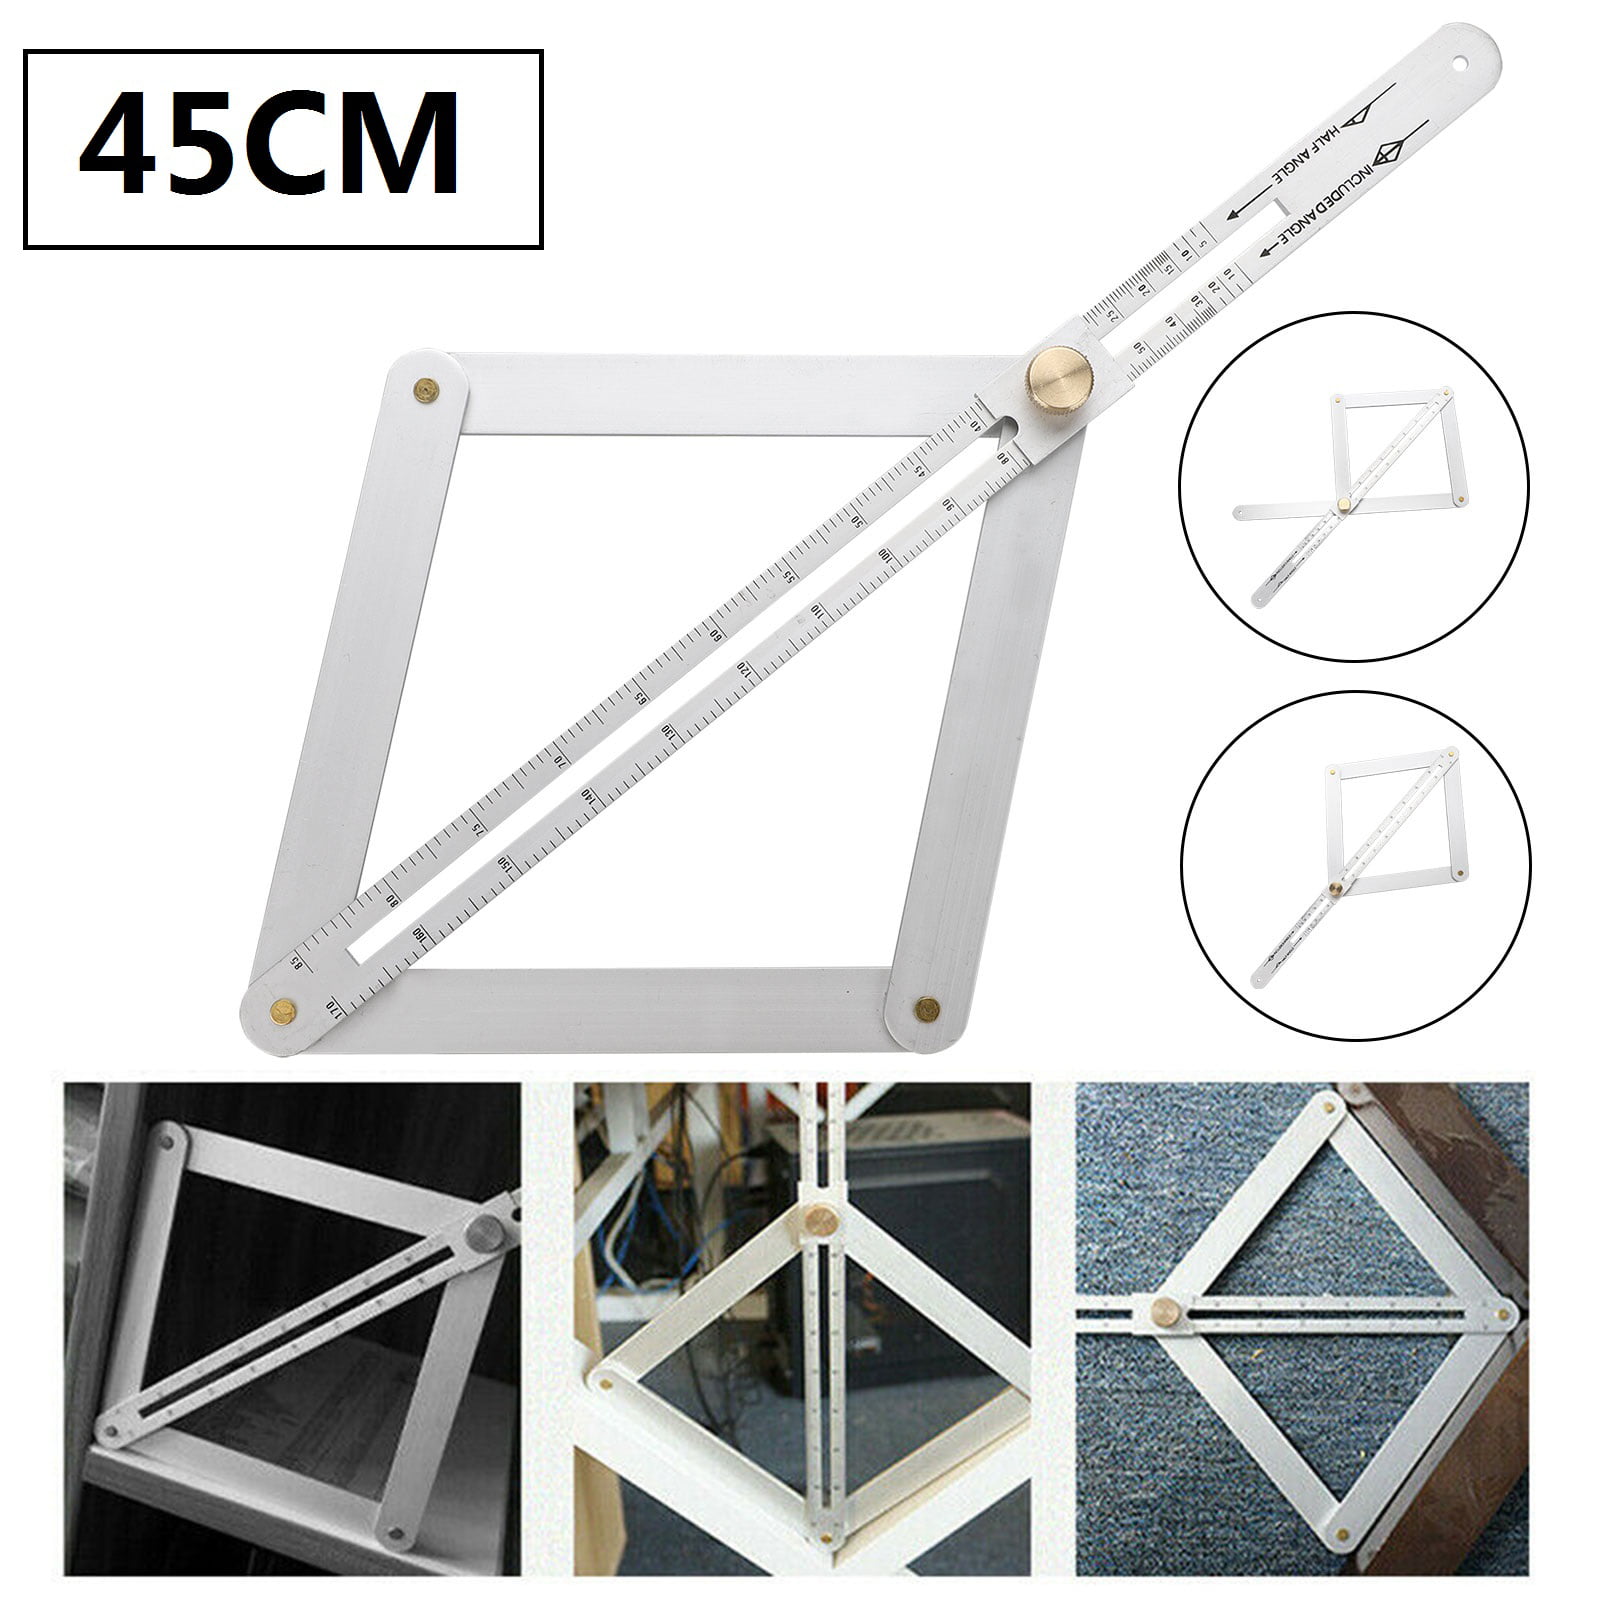 Stainless Steel Corner Angle Finder Ceiling Artifact Tool Square Protractor UK 